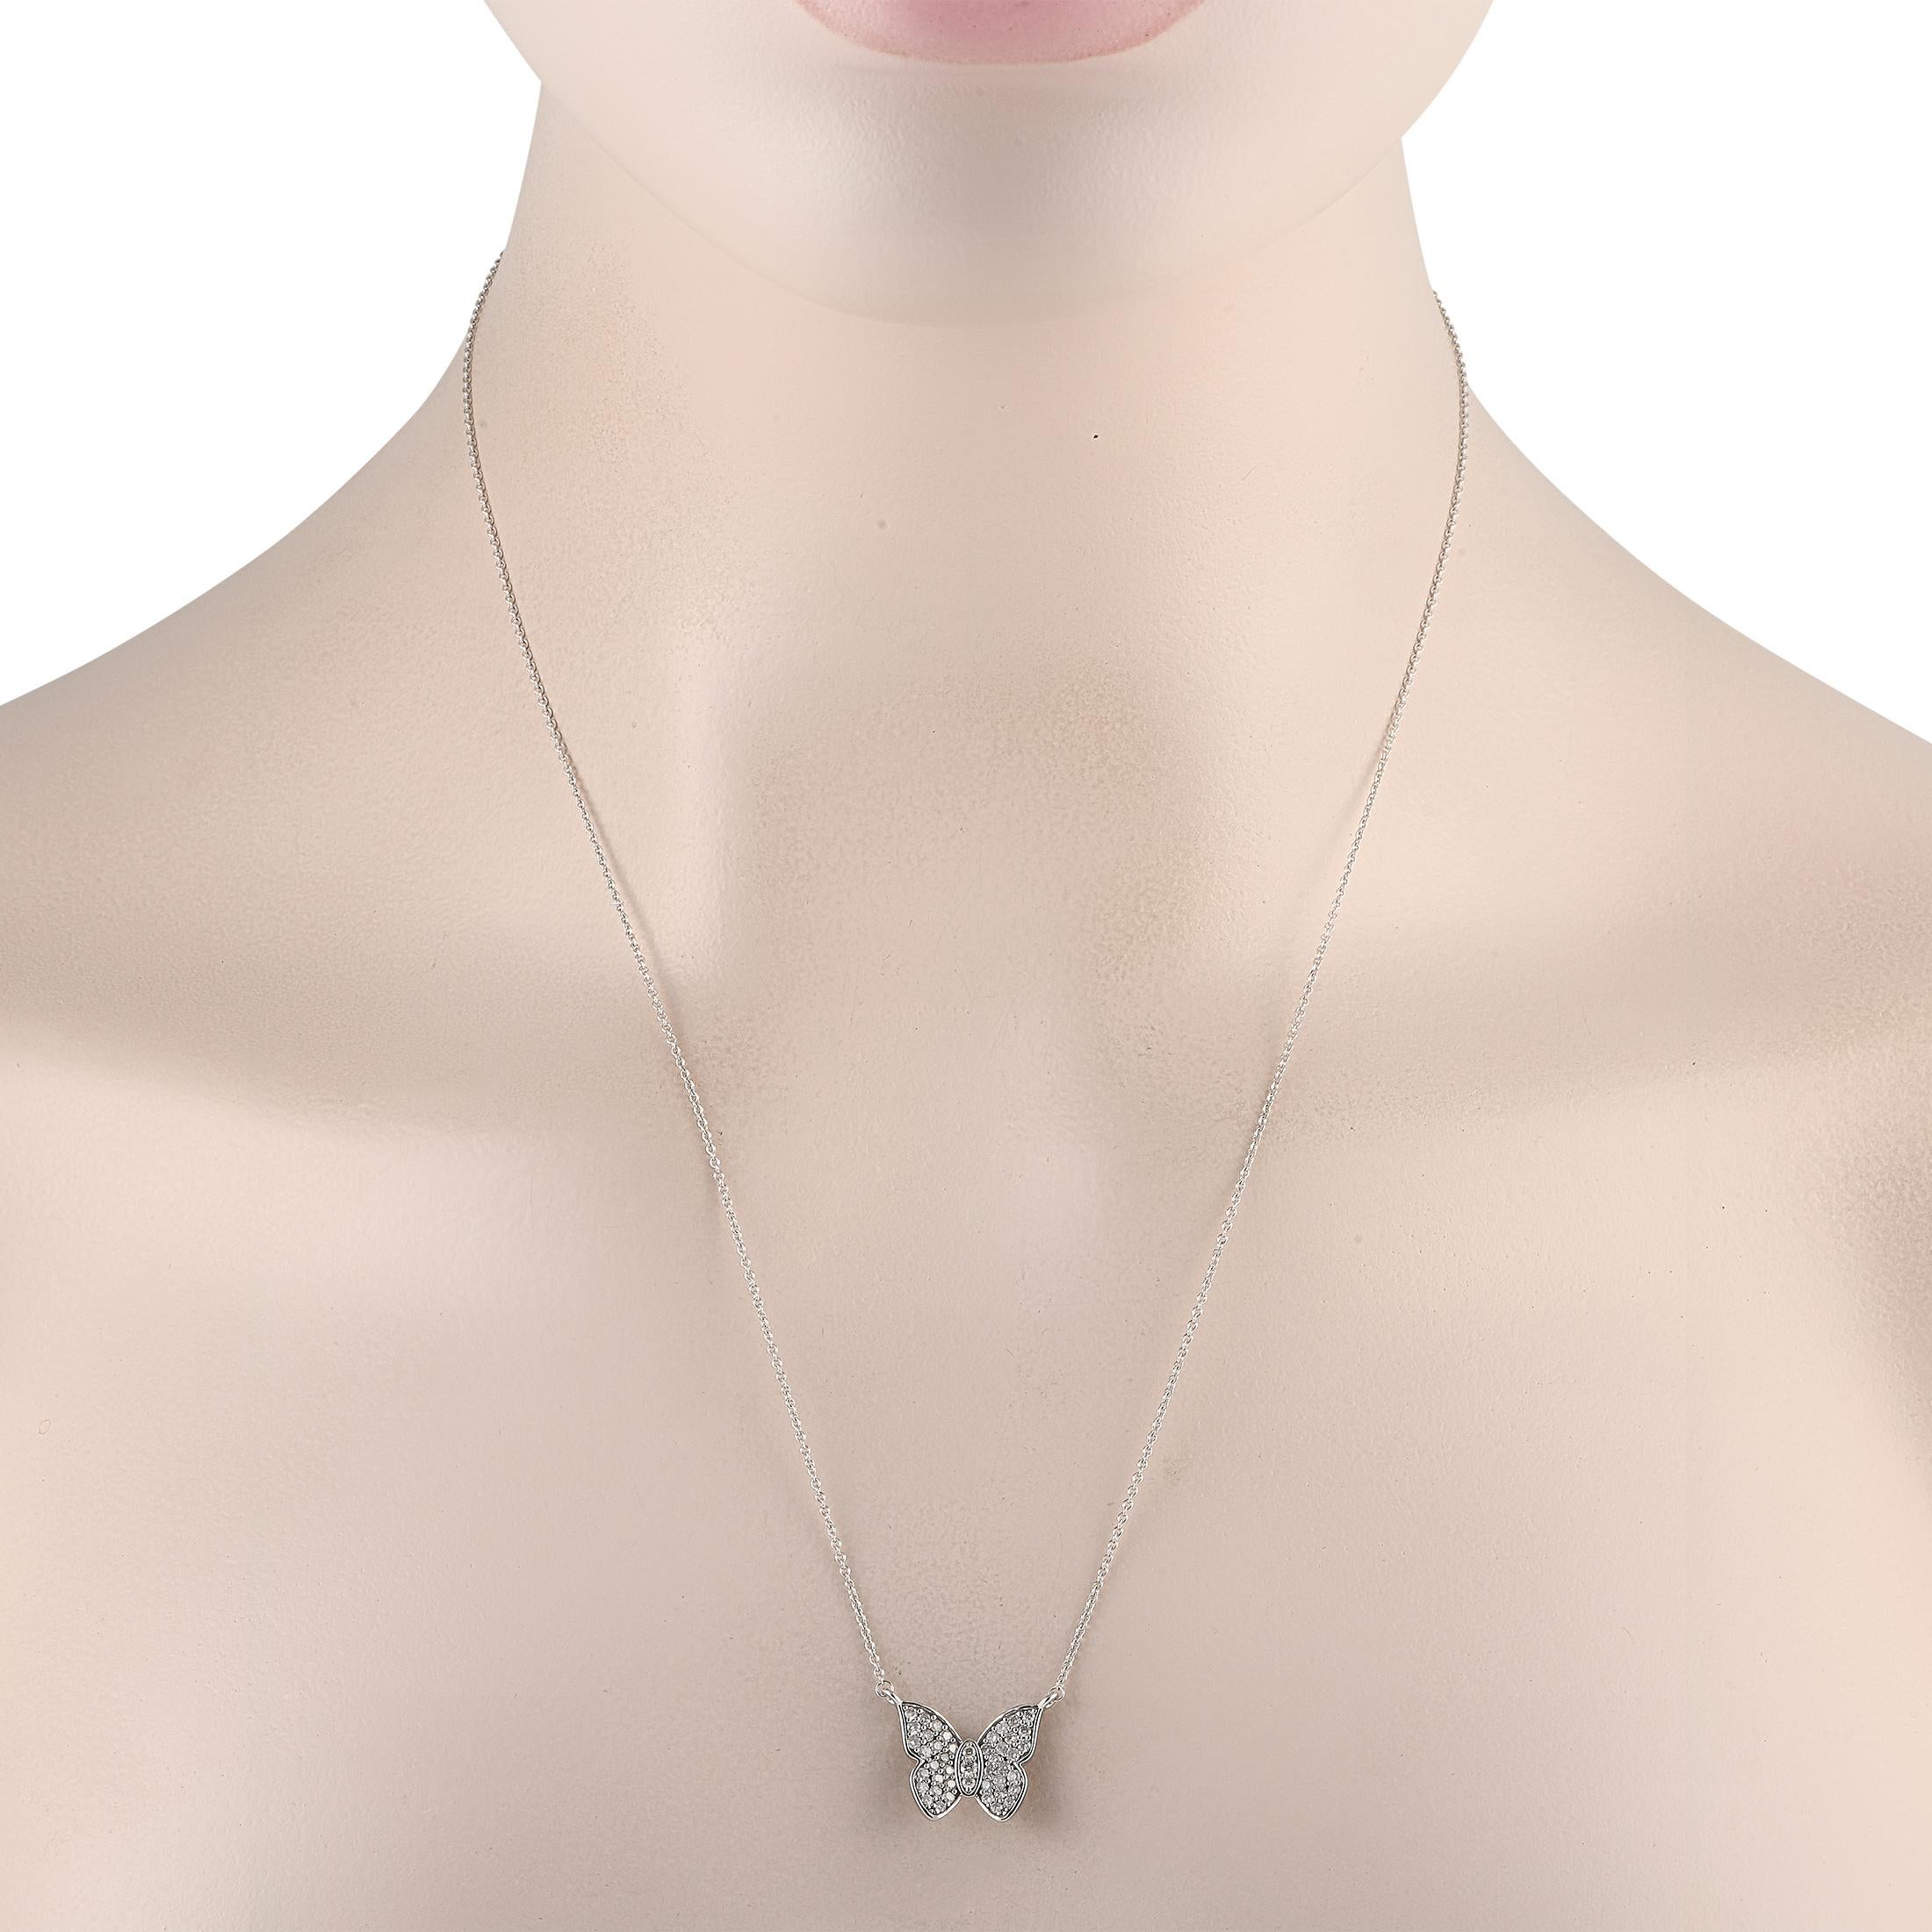 A charming butterfly-shaped pendant measuring 0.50 long by 0.65 wide is suspended at the center of a 20 chain on this exquisite necklace. The pendant is crafted from 14K White Gold and comes to life thanks to sparkling Diamonds with a total weight